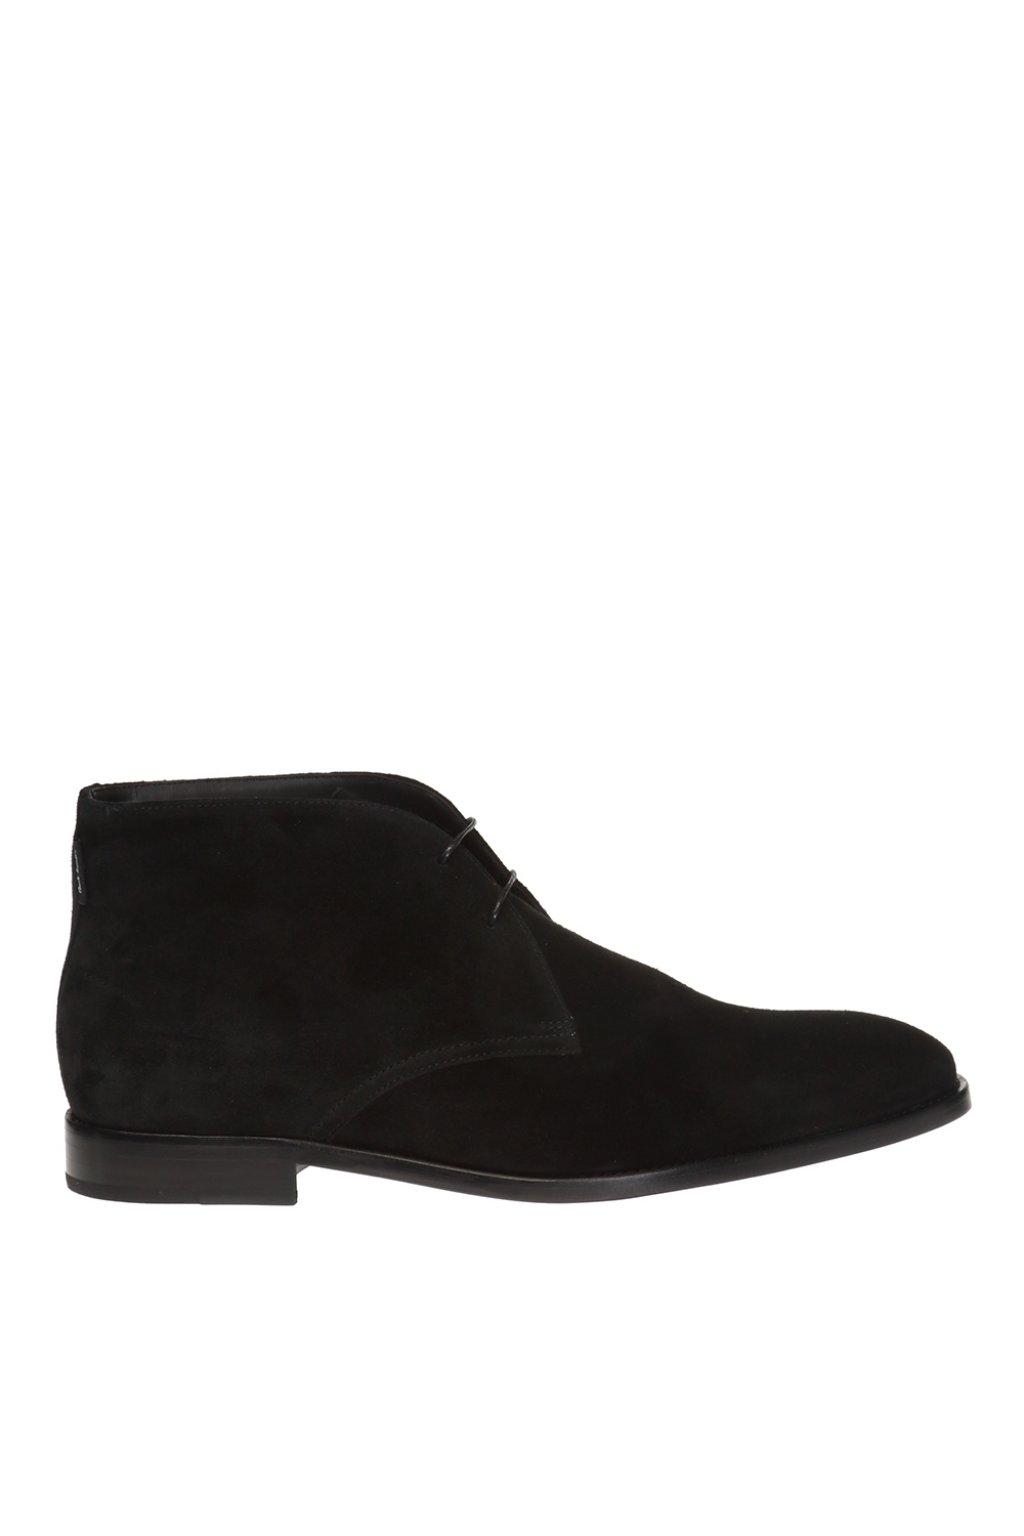 Paul Smith 'arni' Suede Ankle Boots Black for Men - Lyst